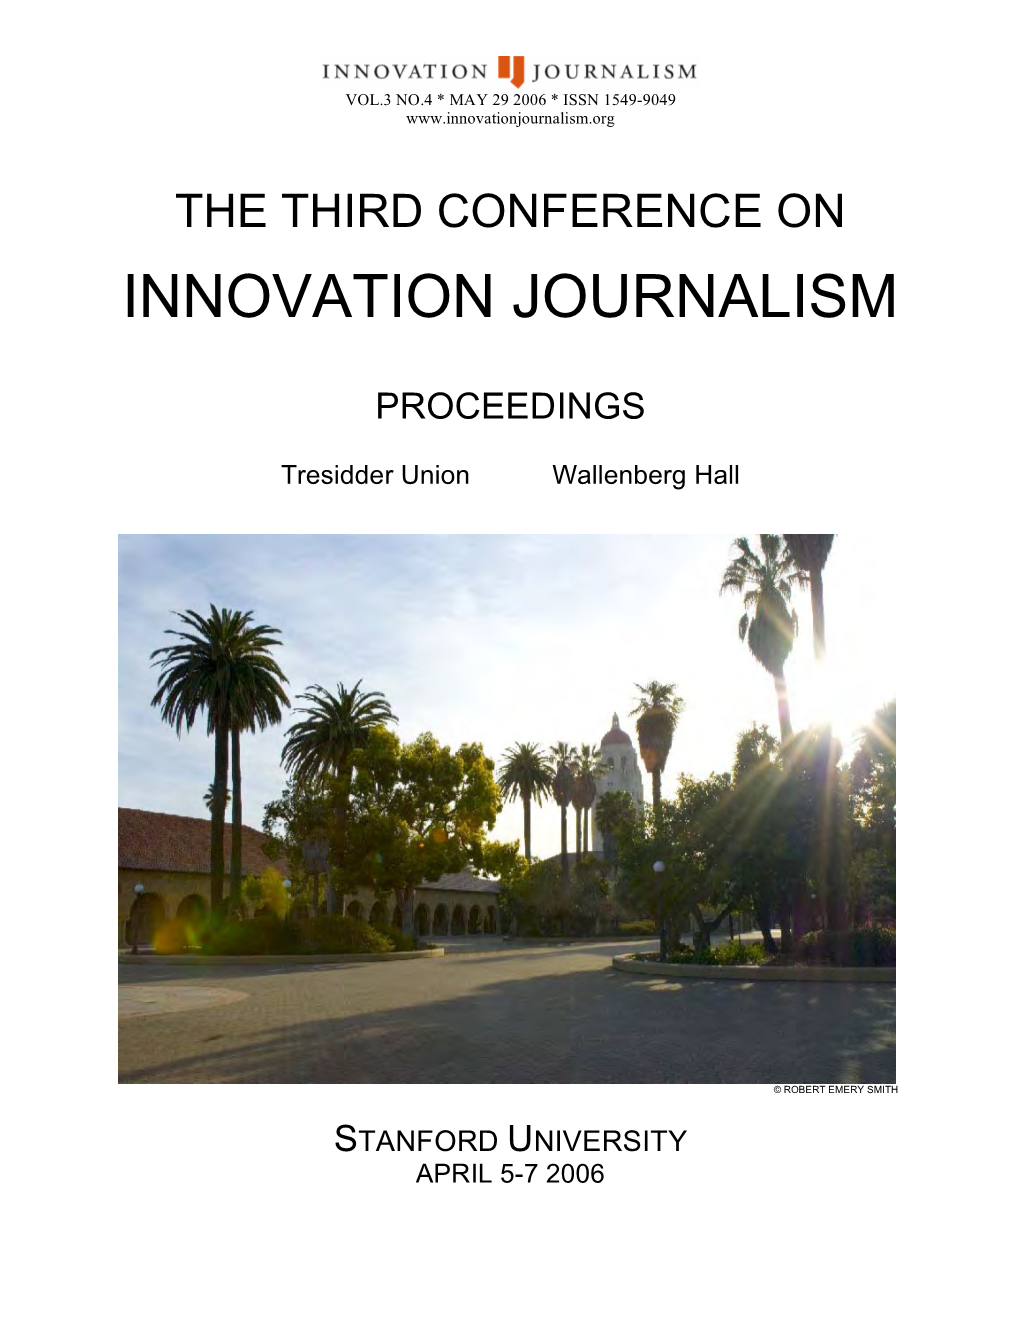 The Third Conference on Innovation Journalism: Proceedings